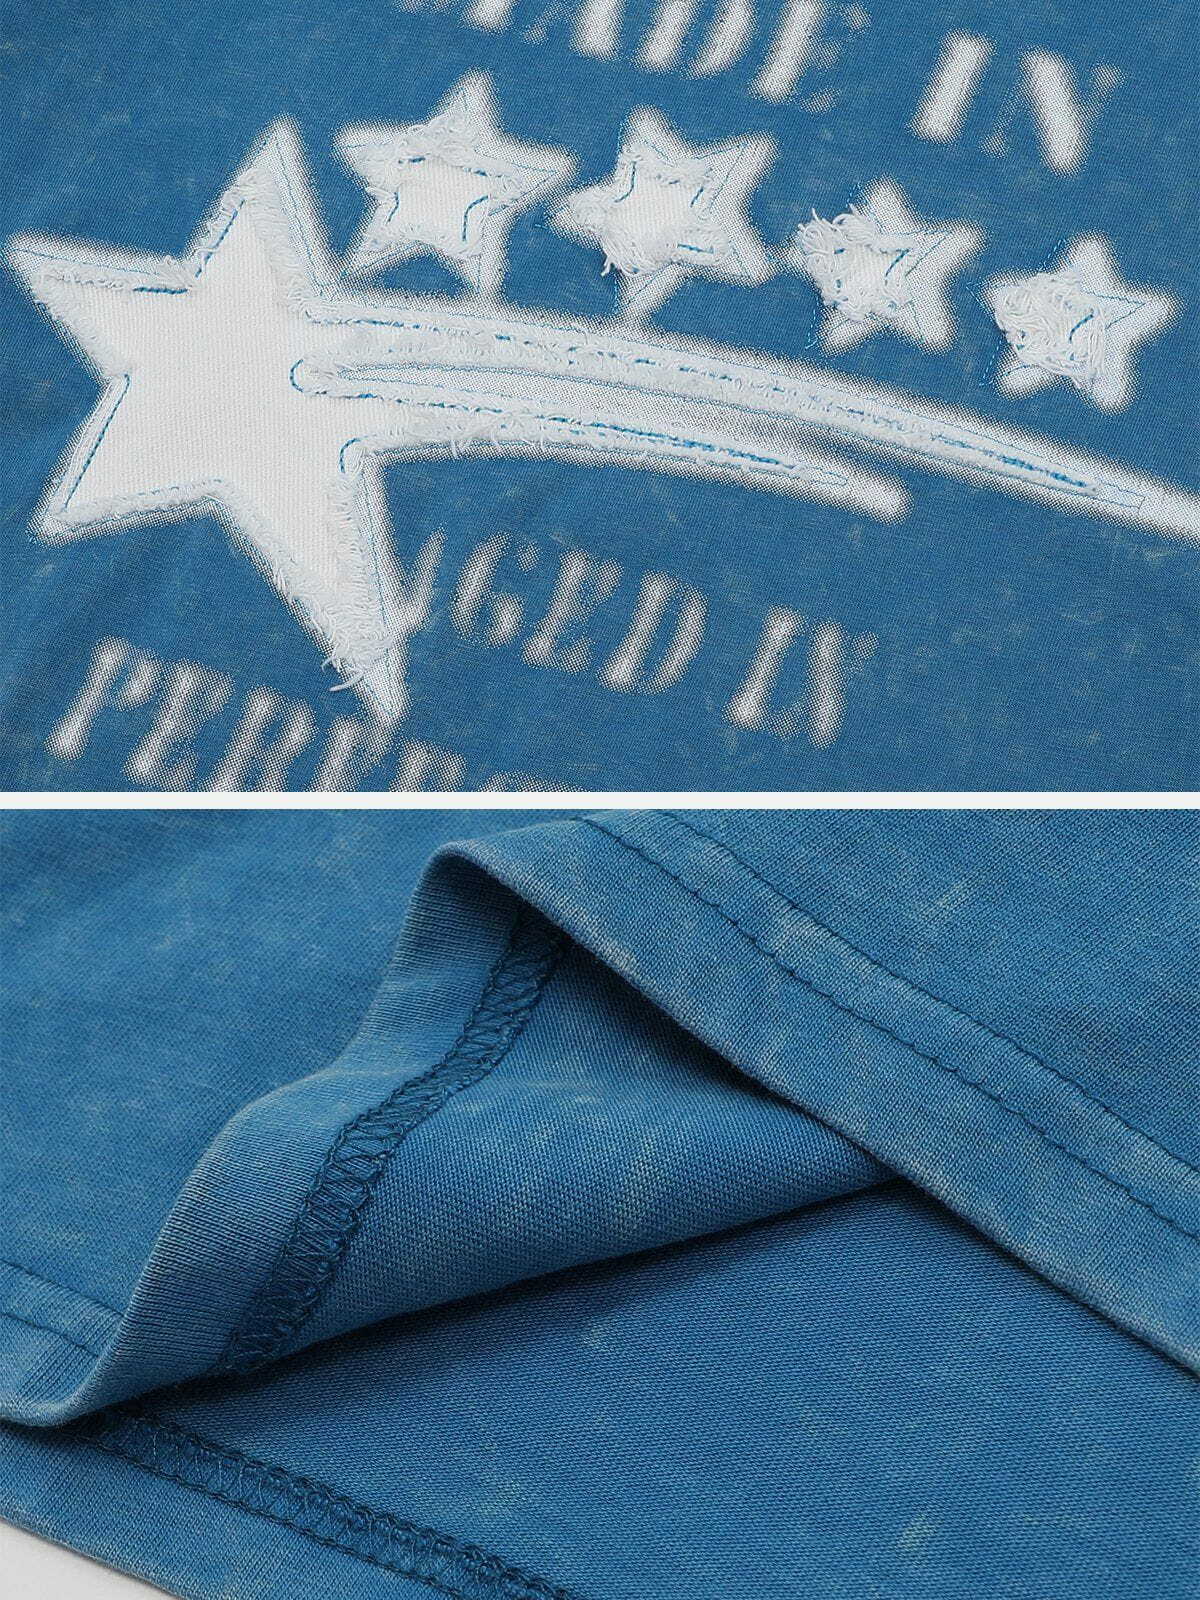 embroidered star patch tee quirky & retro streetwear 6552